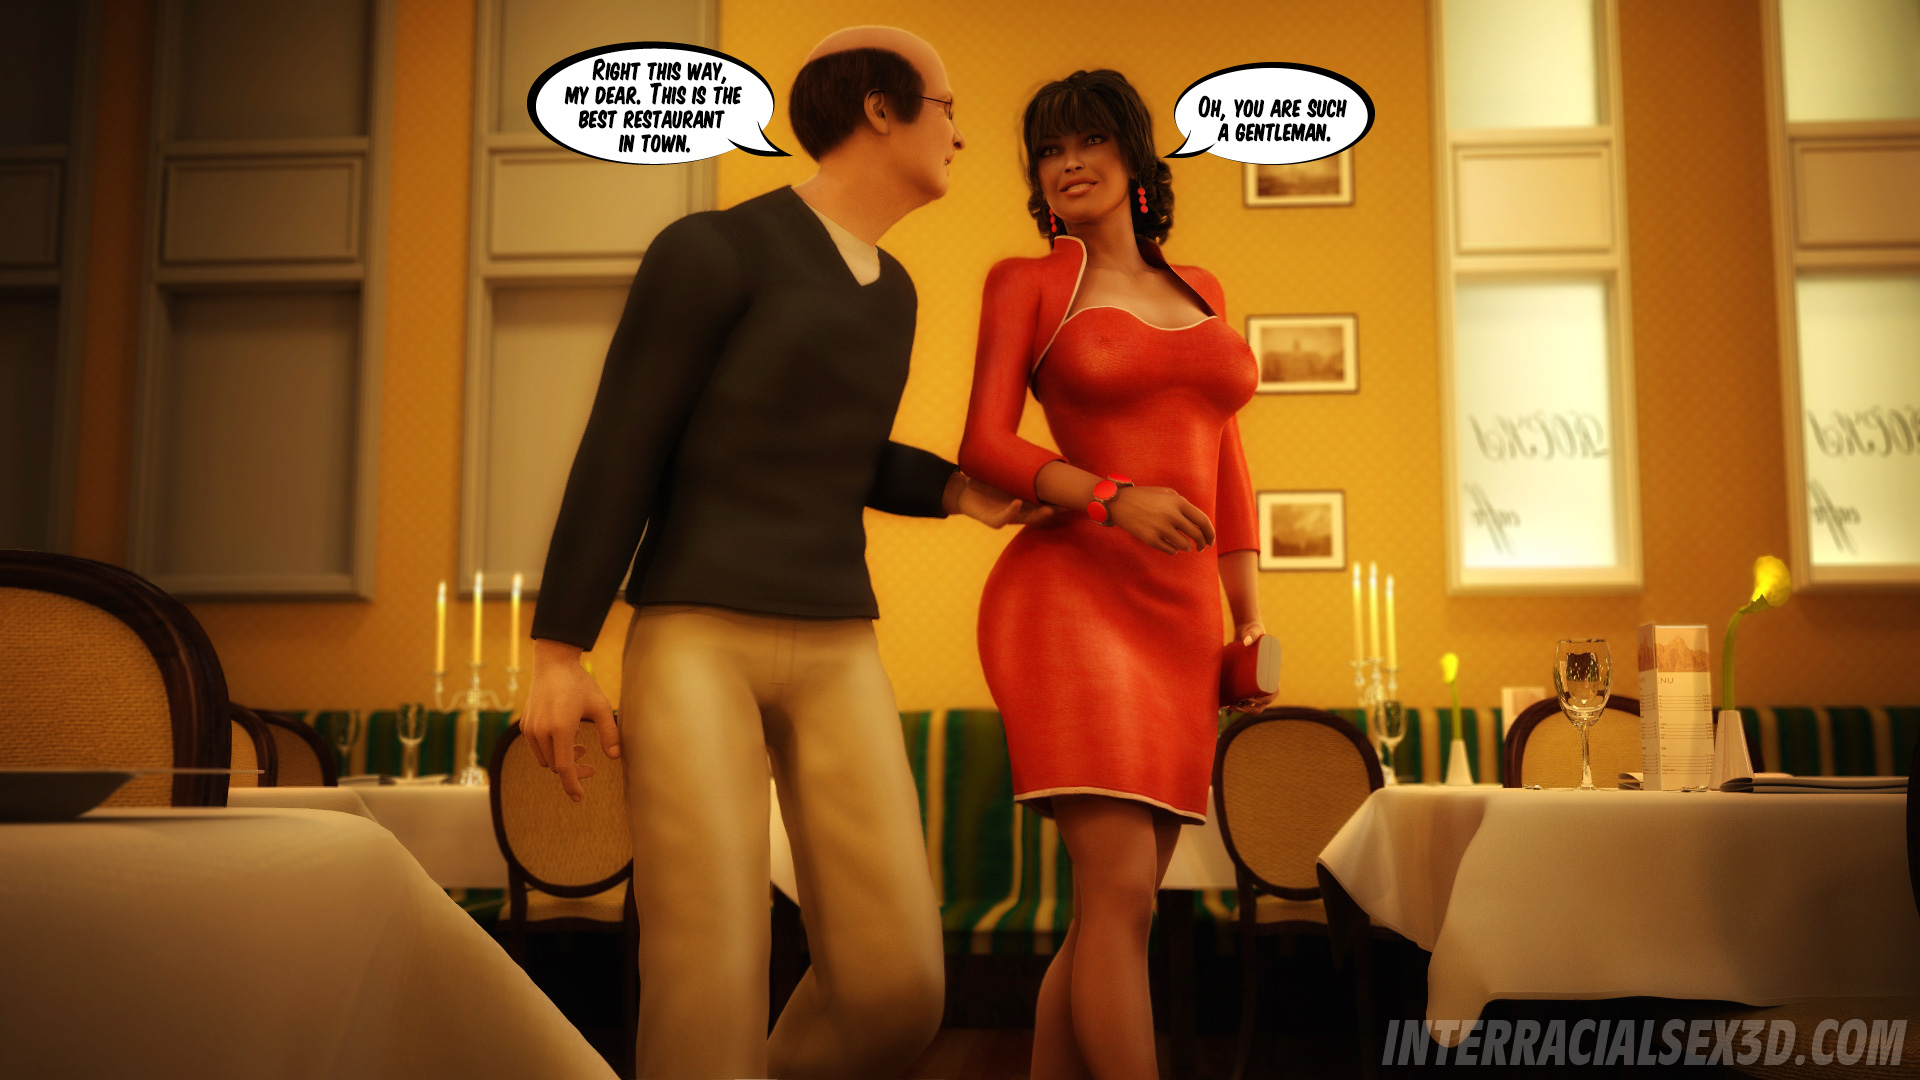 Wedding Anniversary and Cheating Wife Interracialsex3D - Wedding Anniversary and Cheating Wife image picture